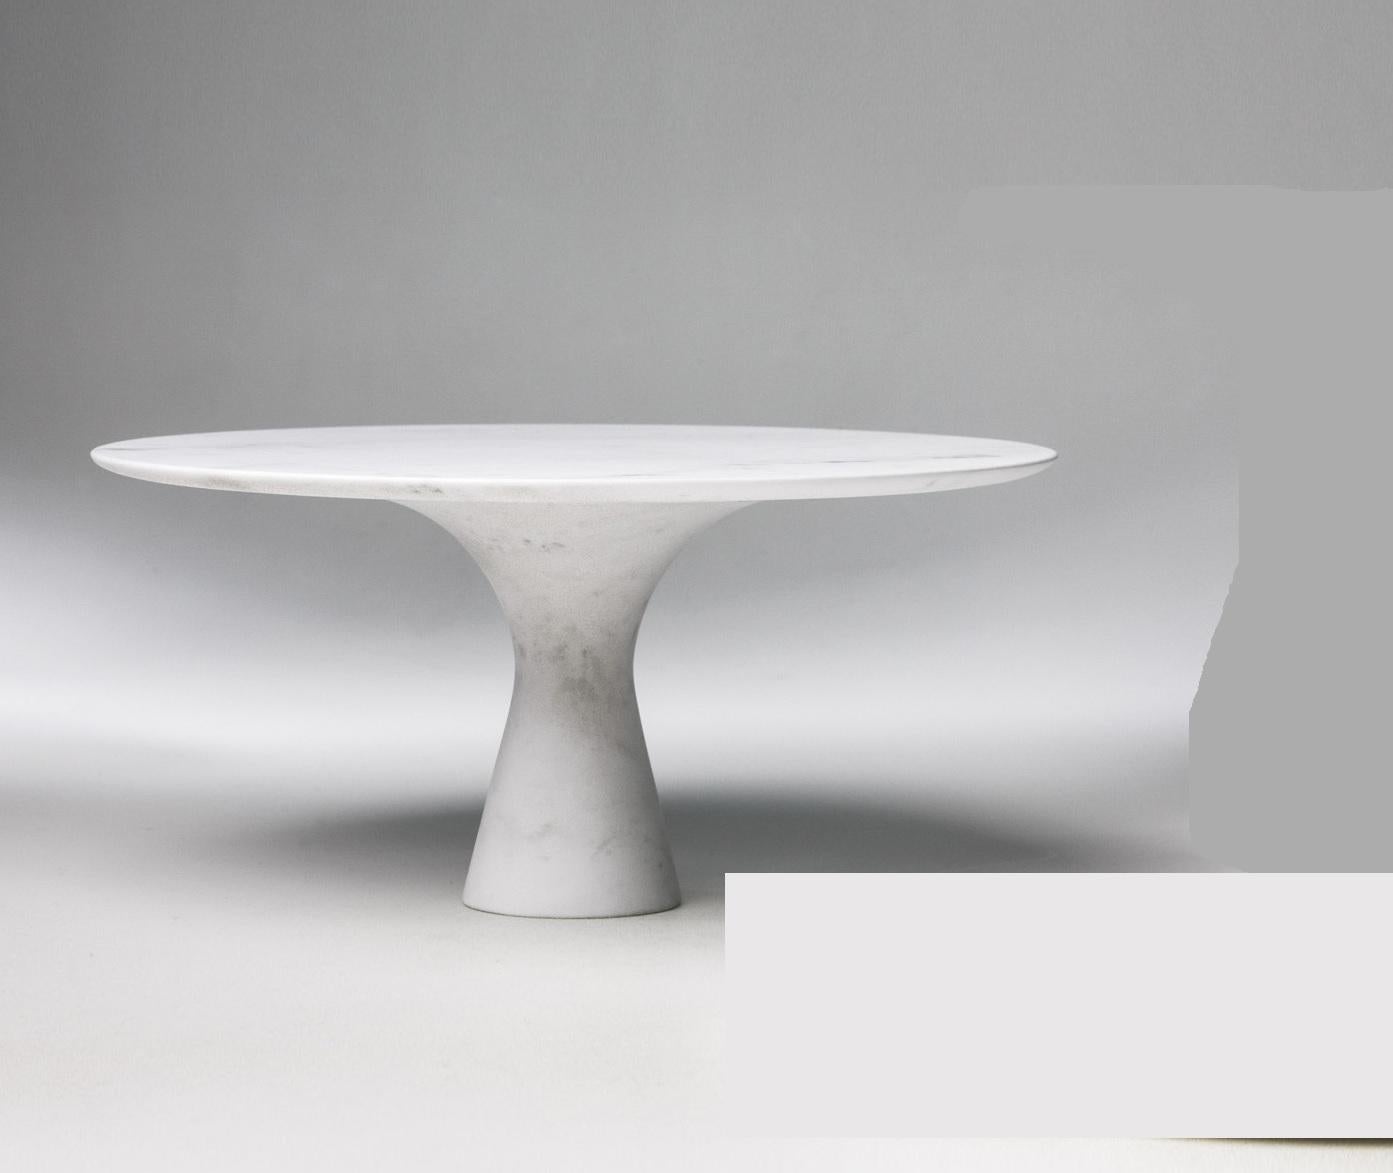 Refined Contemporary marble 02 Kyknos marble cake stand
Signed by Leo Aerts.
Dimensions: diameter 32 x height 15 cm 
Material: Kyknos Marble
Technique: Polished, Carved. 
Available in Marble: Kyknos, Bianco Statuarietto, Grey Saint Laurent,